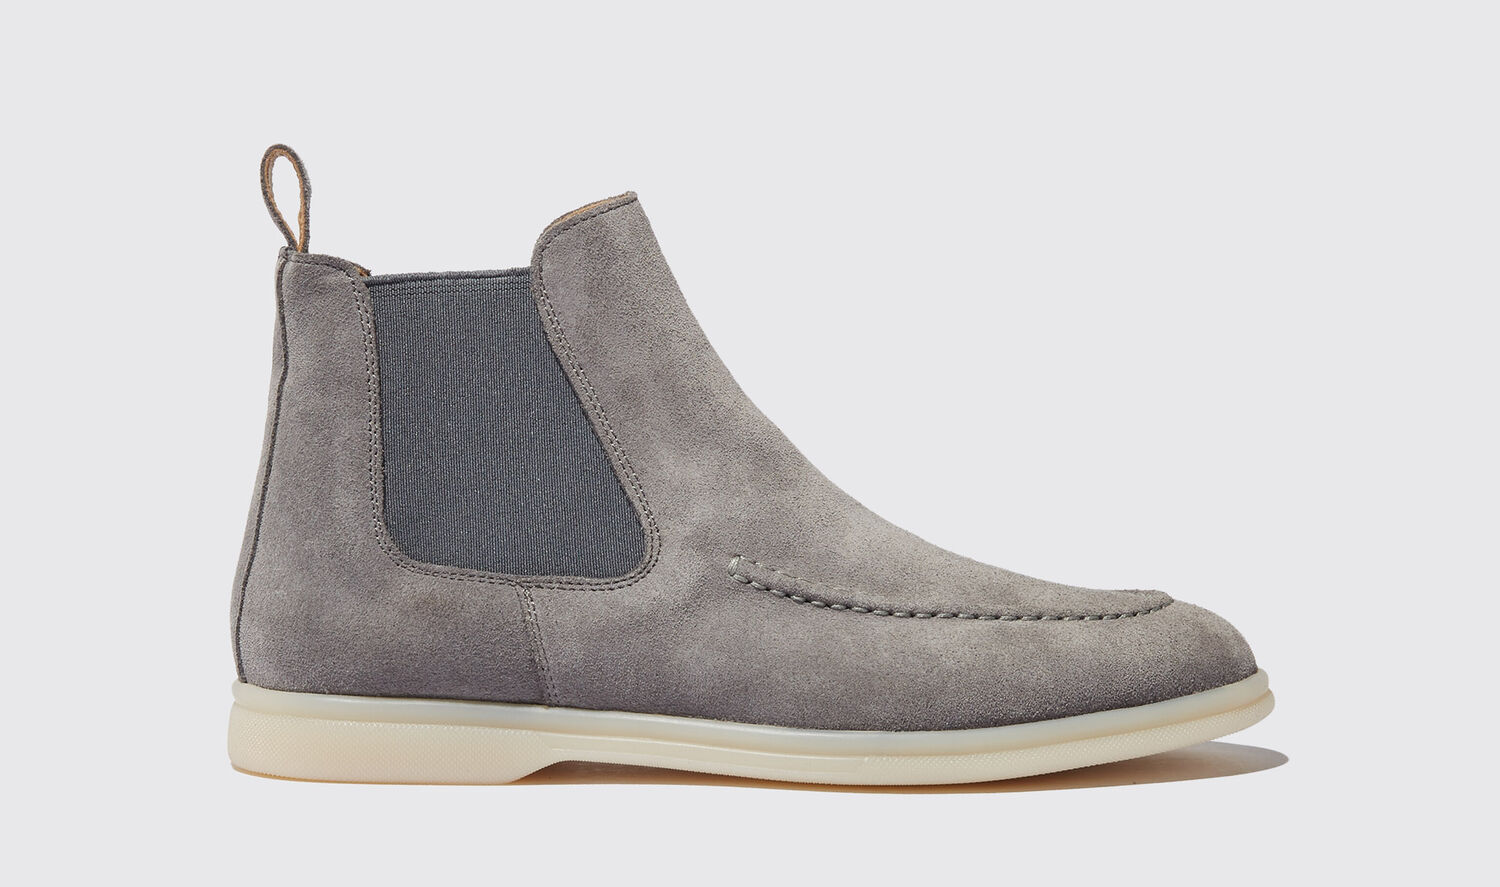 Scarosso Eugenia Suede Ankle Boots In Grey Suede Leather